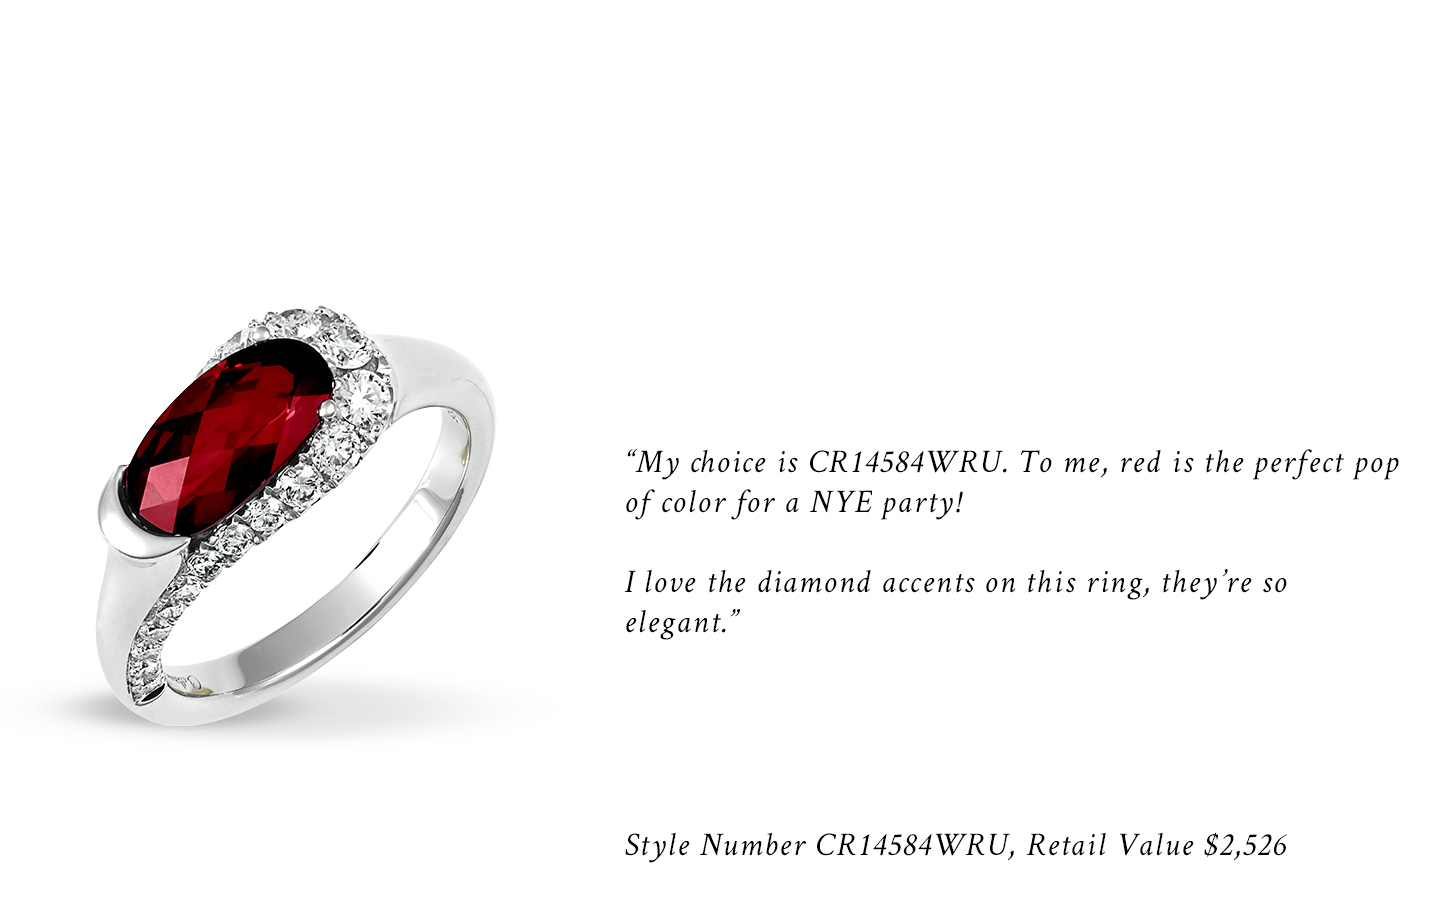 "My choice is CR14584WRU. To me, red is the perfect pop of color for a NYE party! I love the diamond accents on this ring, they're so elegant." Style Number CR14584WRU, Retail Value $2,526